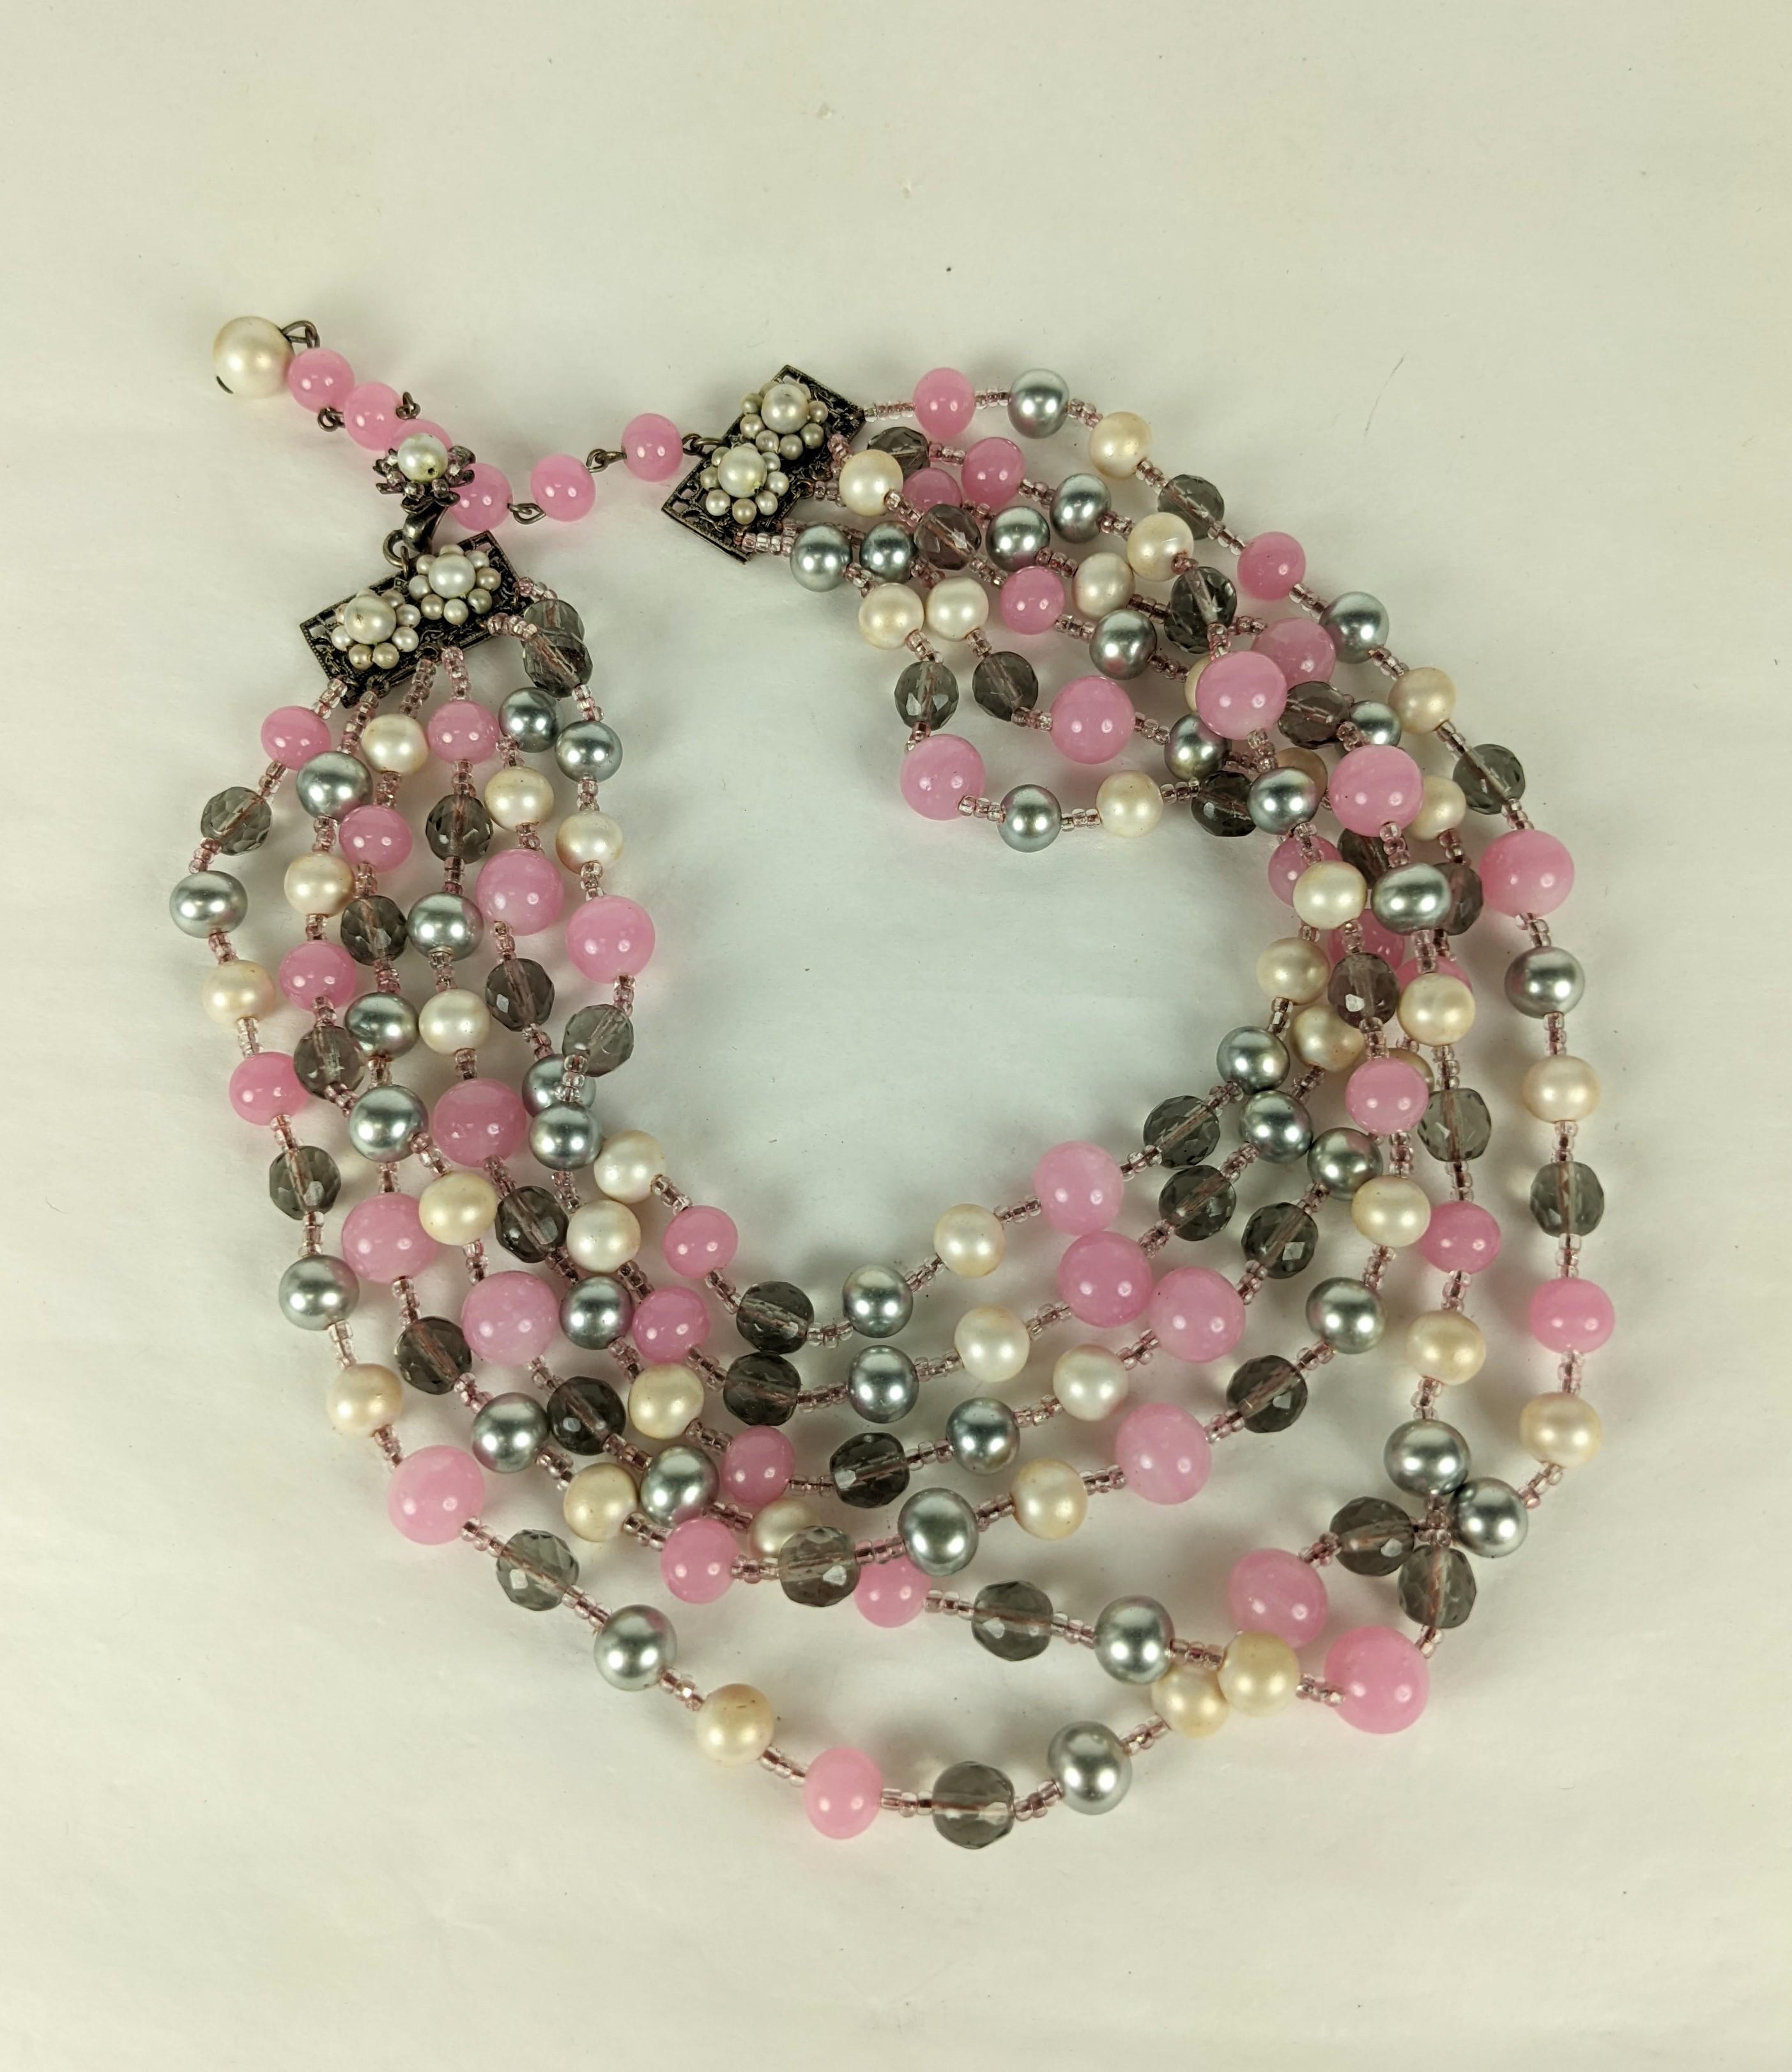 Dramatic Miriam Haskell Grey, Pink and Freshwater Faux Pearl Beads in 6 strand graduated configuration. Composed of faux grey and white freshwater pearls with pink pate de verre beads and smoke faceted crystals all separated by tiny seed beads.